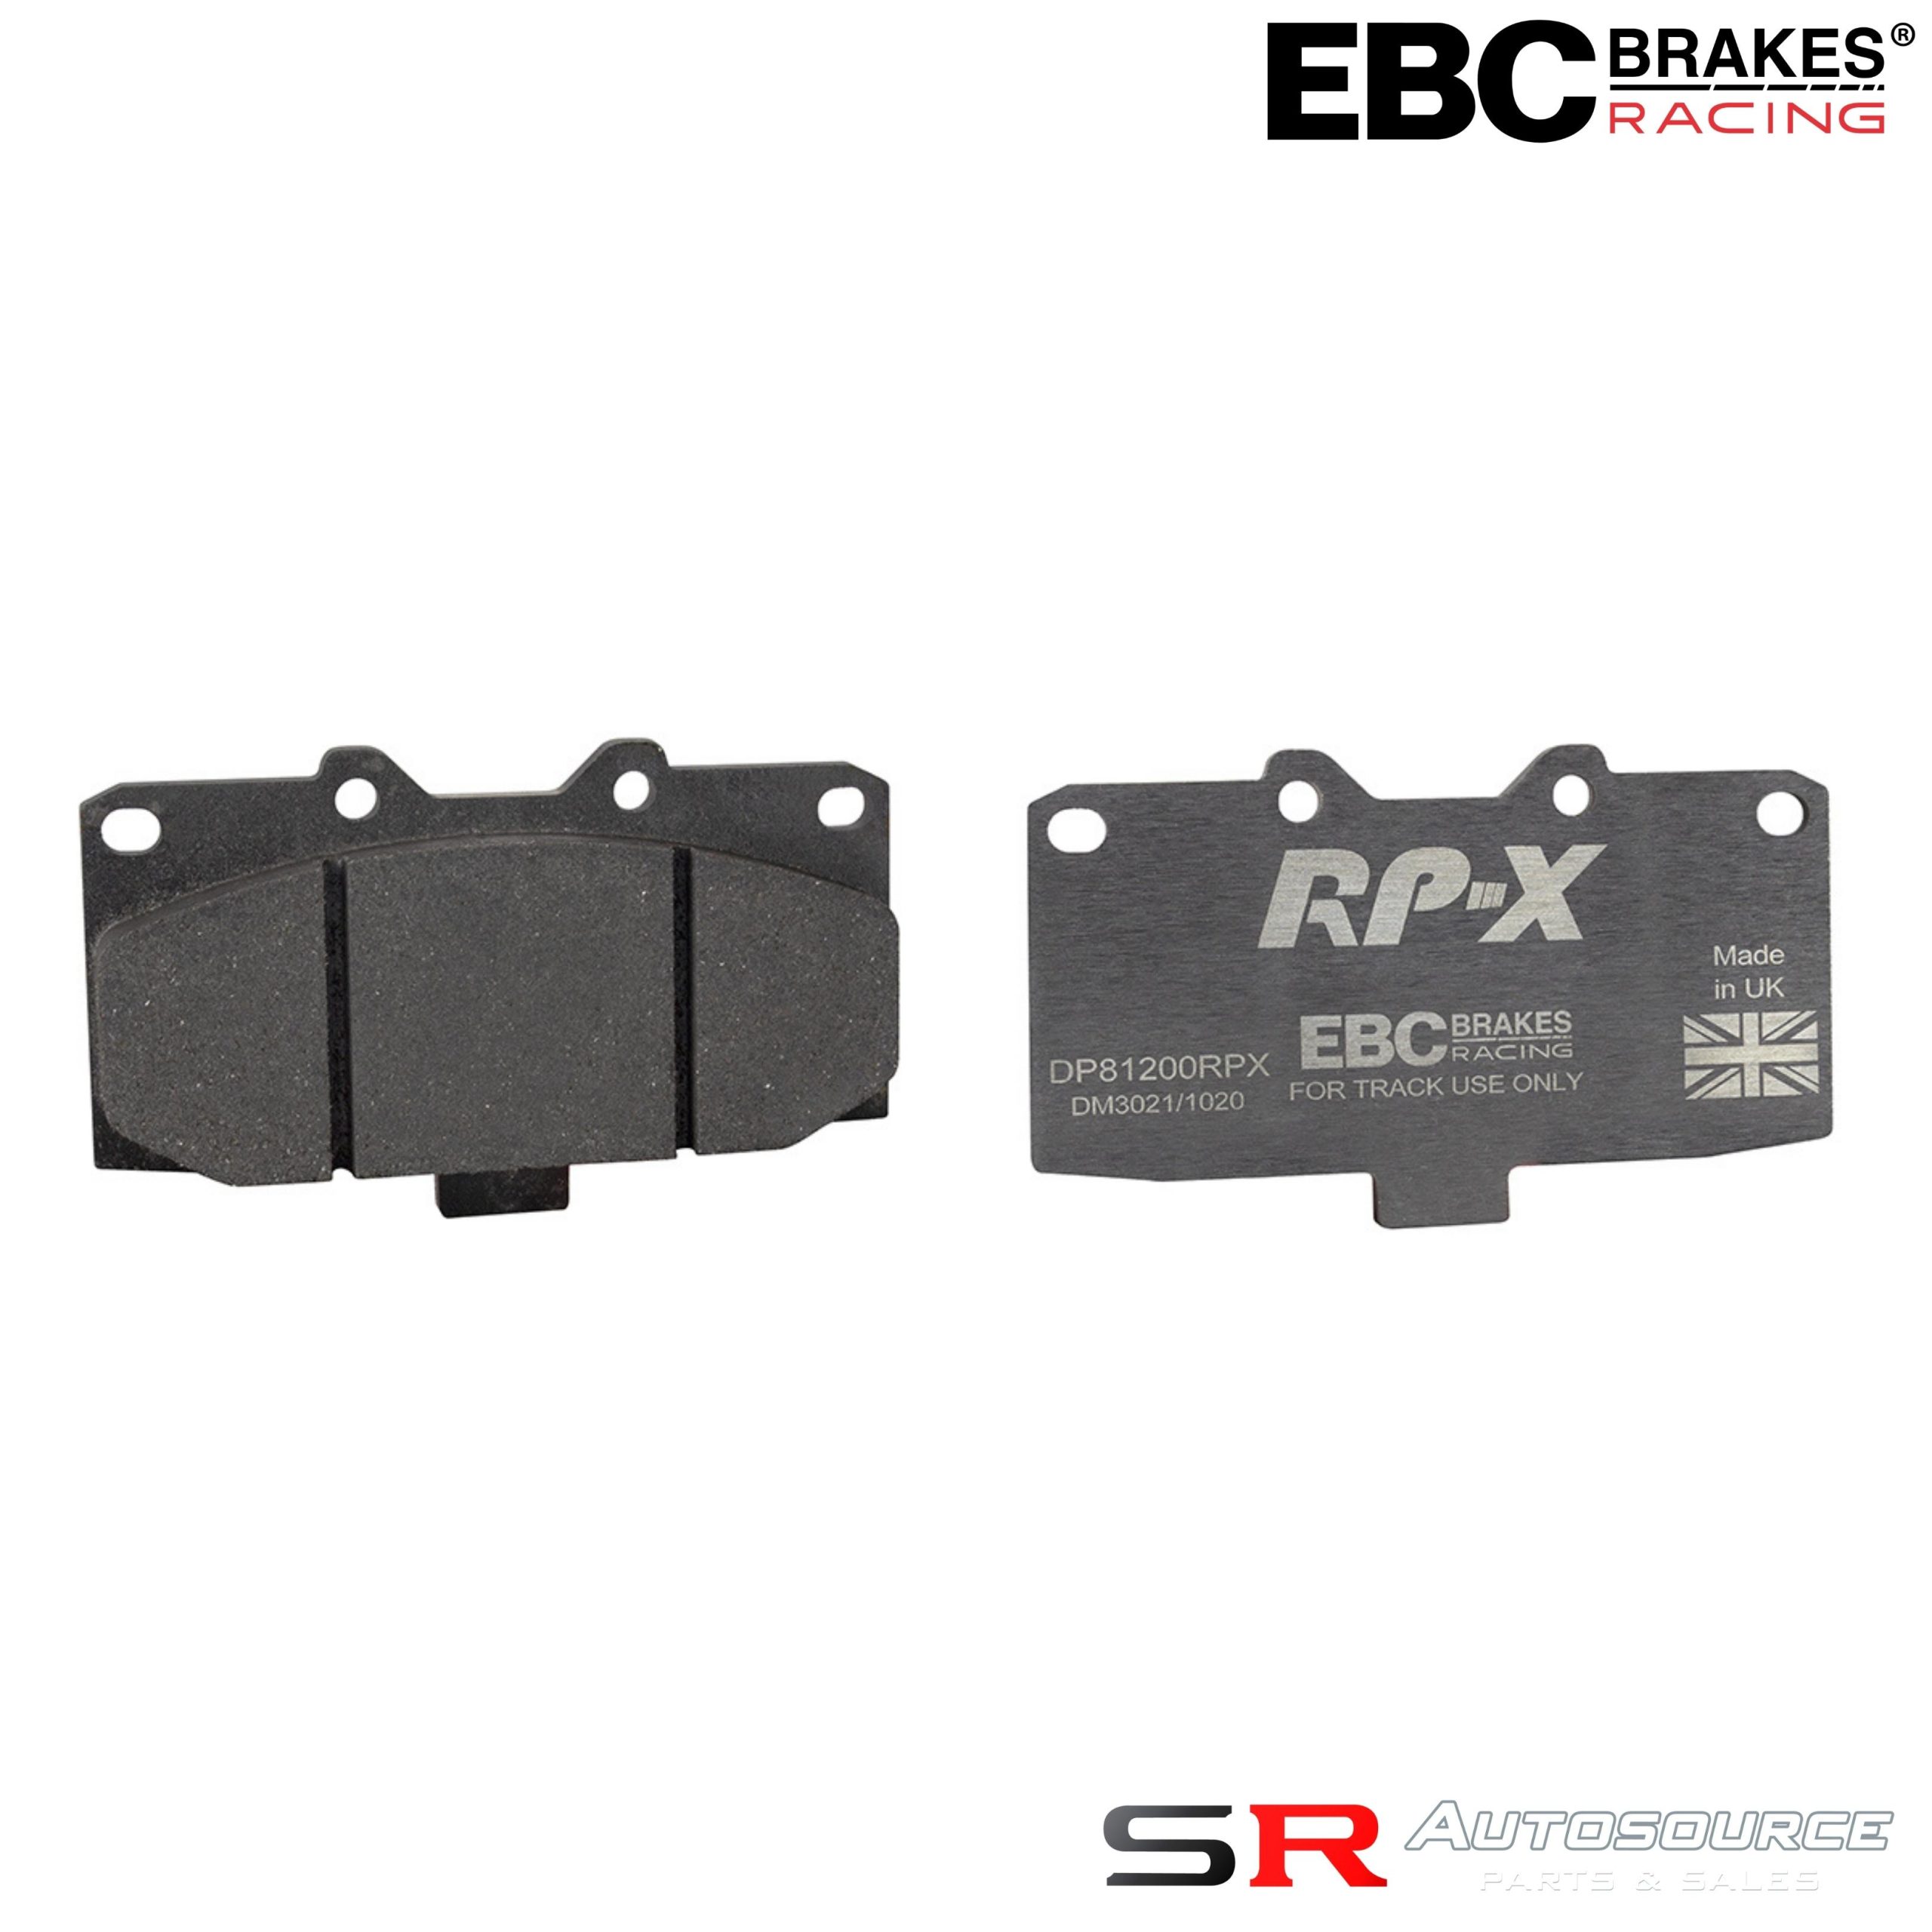 EBC Uprated Front and Rear Brake Pads R32 GTR Non V Spec (Sumitomo Calipers)